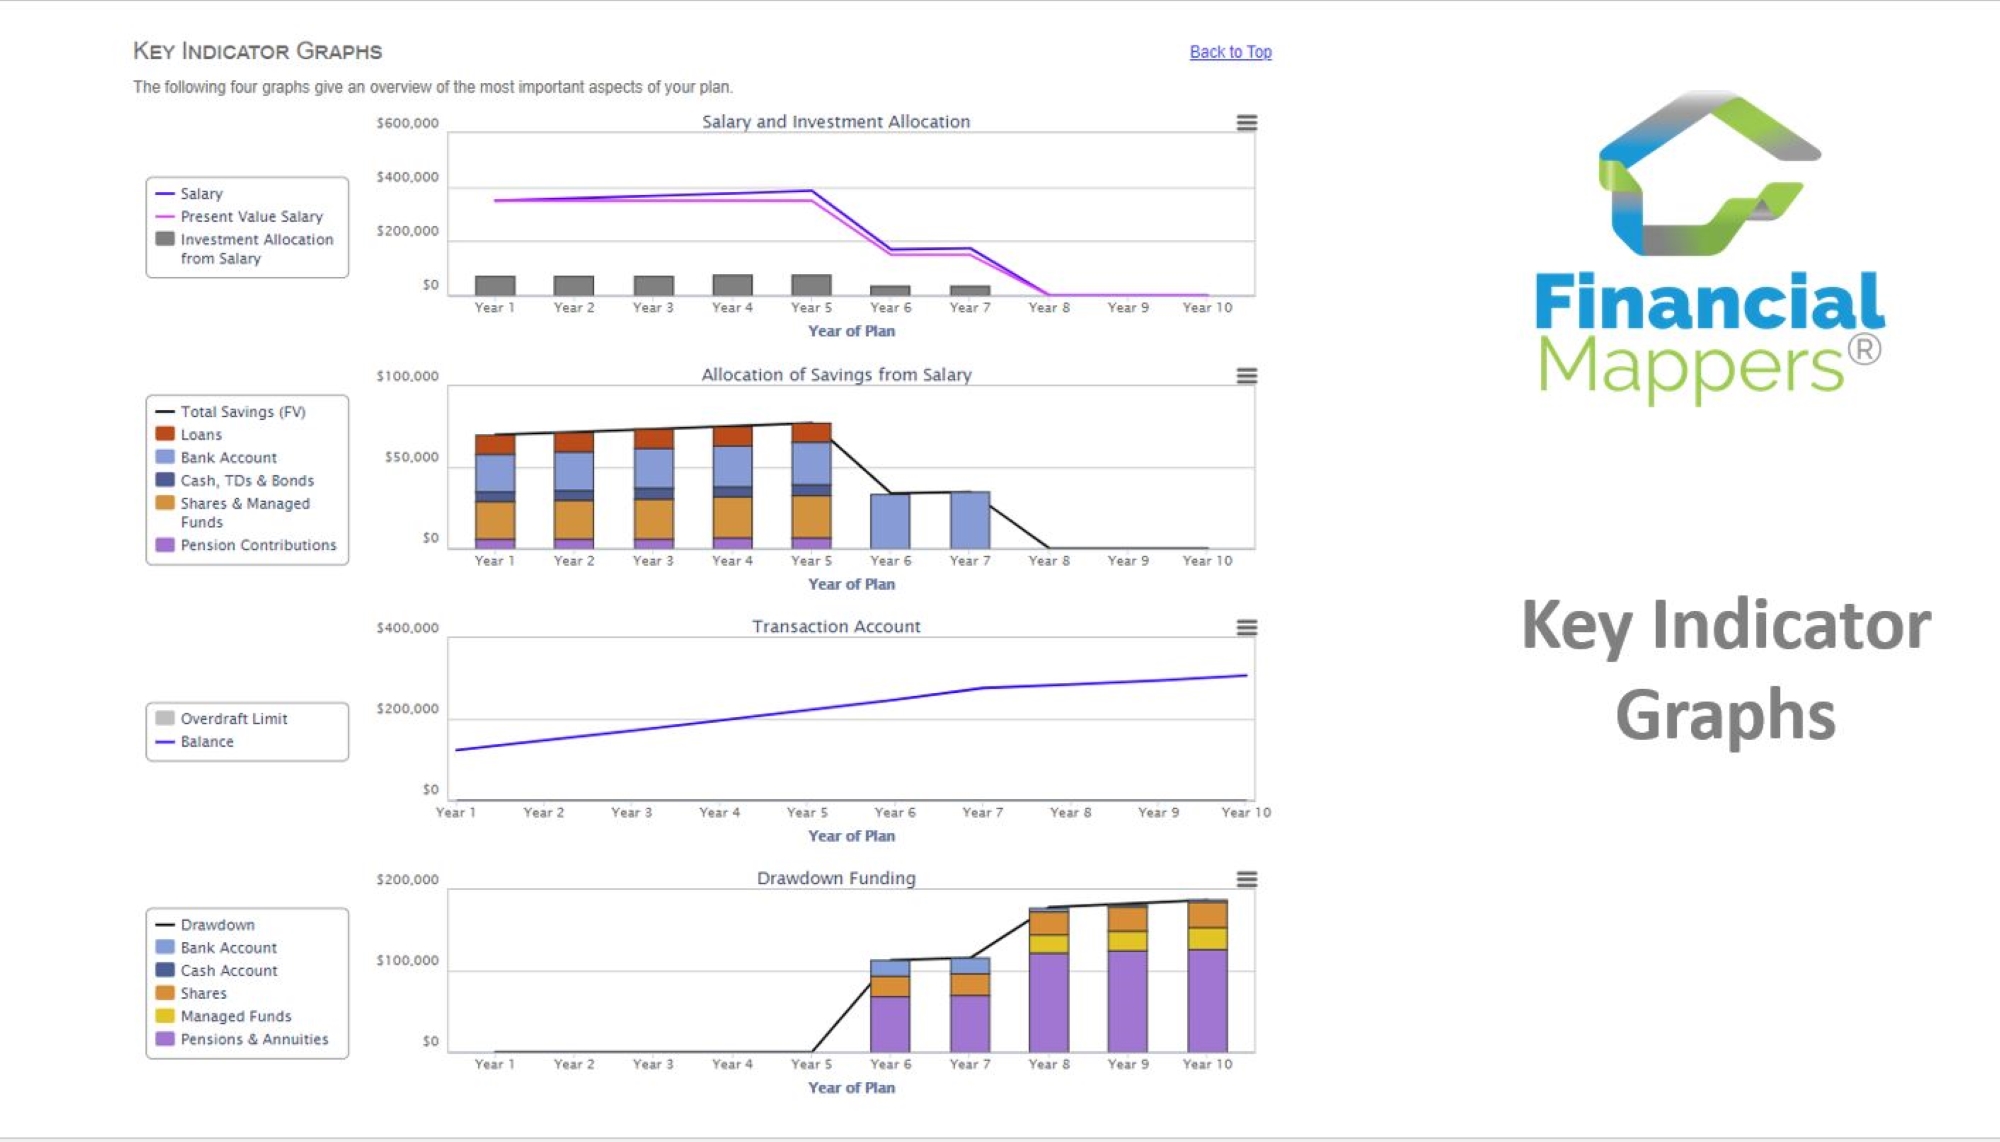 Screenshot Key Indicator Graphs showing graphs for Salary, Allocation of Salary, Transaction Account Balance and Drawdown Funding in Financial Mappers software.